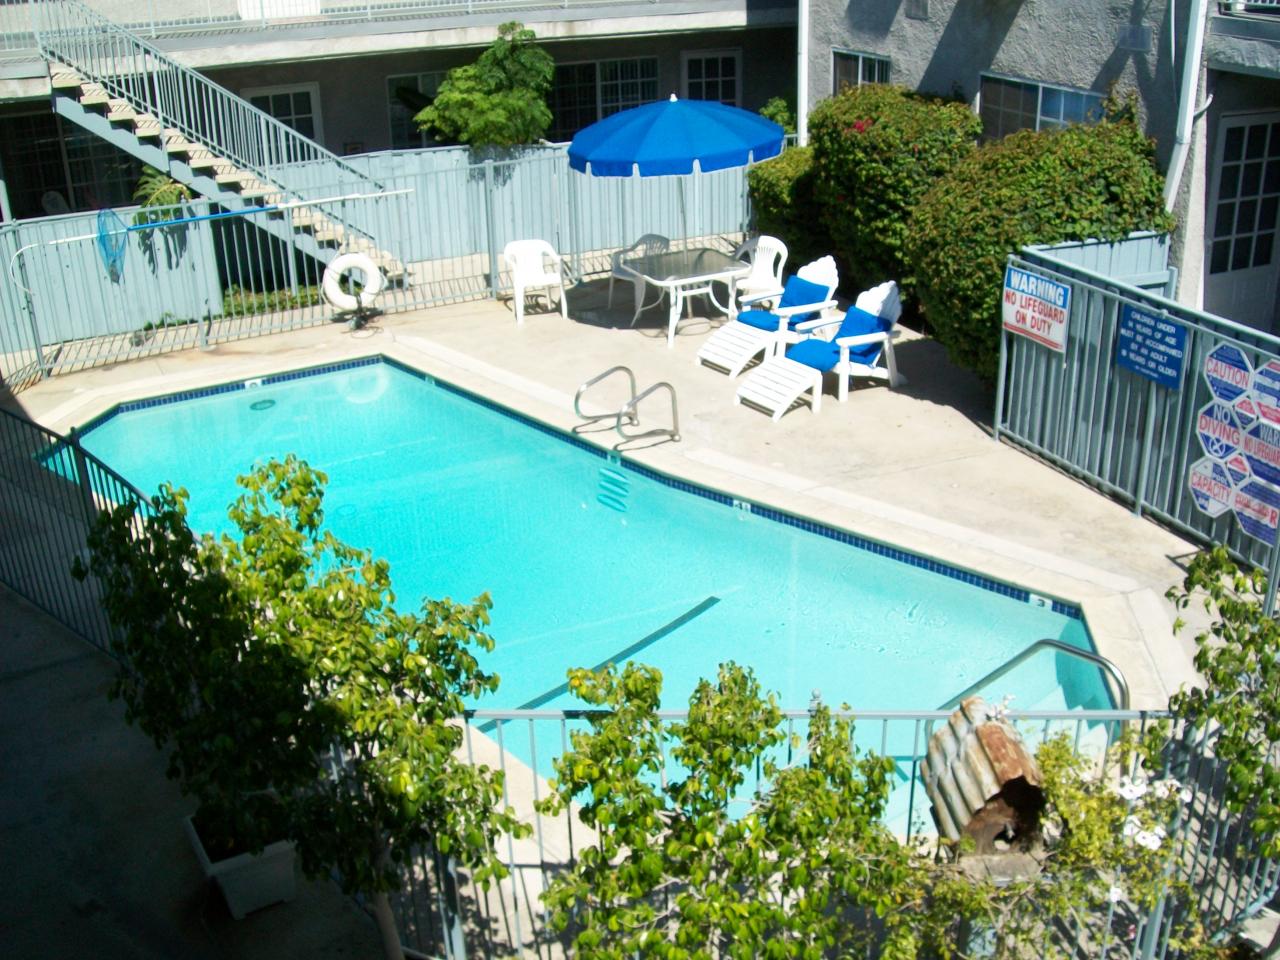 Photo of Kingsbury Villas Apartments - an alternate view of the pool from above